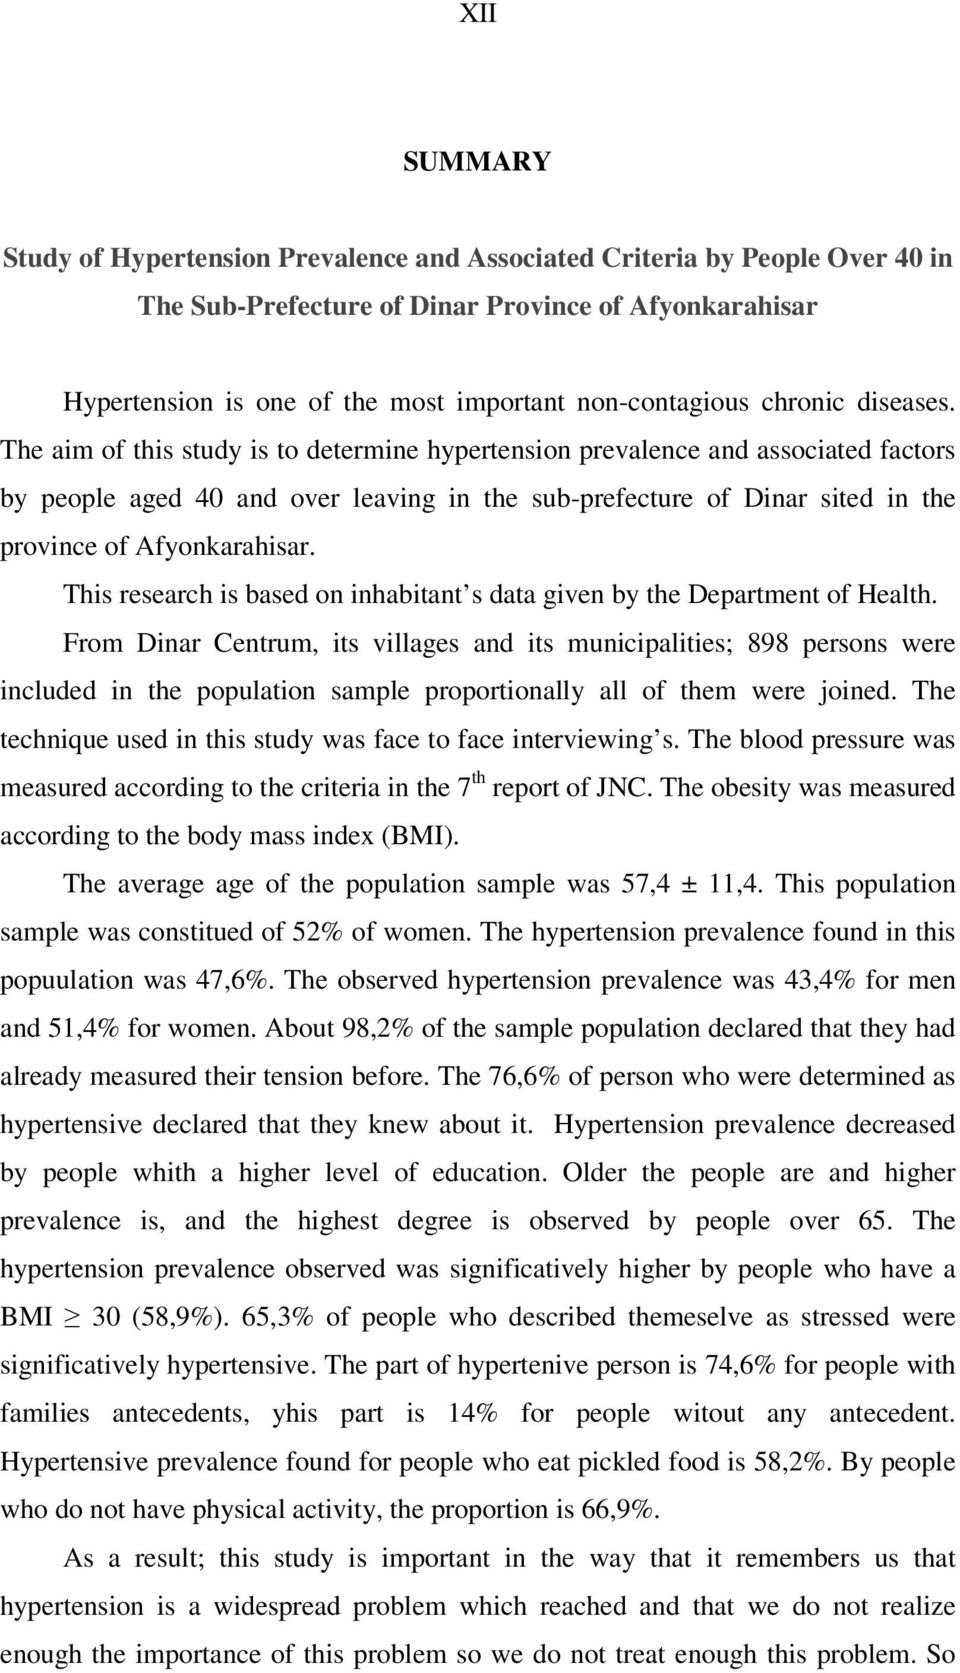 The aim of this study is to determine hypertension prevalence and associated factors by people aged 40 and over leaving in the sub-prefecture of Dinar sited in the province of Afyonkarahisar.